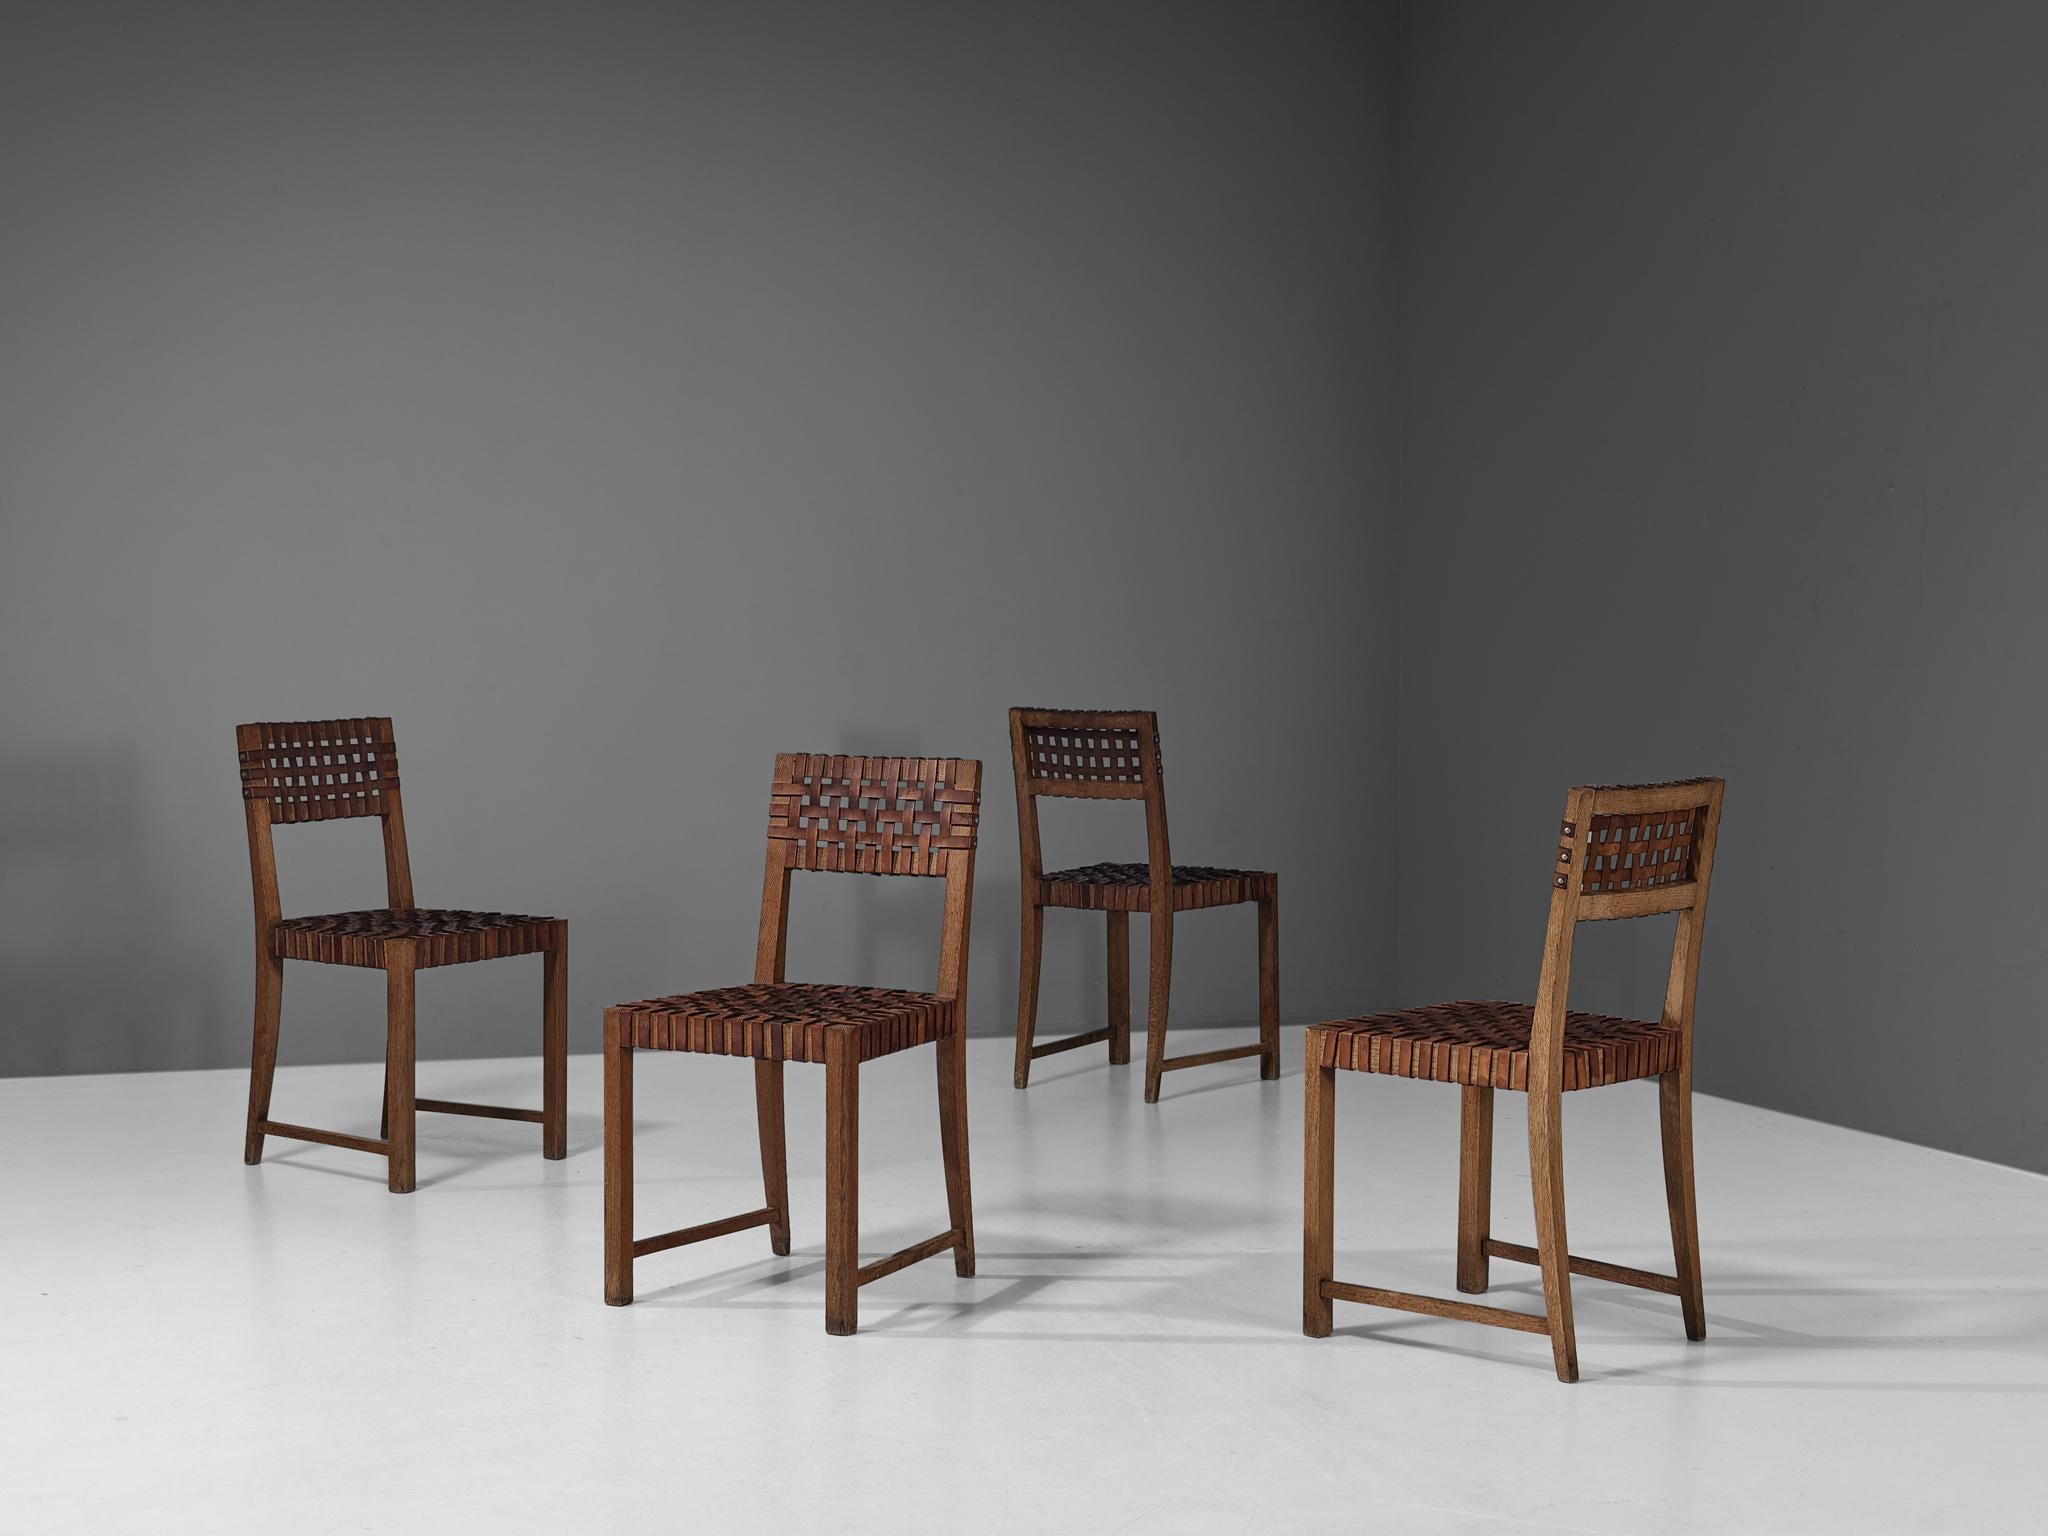 Set of four chairs, oak, leather, metal, France, 1950s. 

These robust chairs feature wonderful patinated leather on both seat and back. The patina creates a vibrant look and the straps in the seat form a thick, well-constructed yet aesthetically